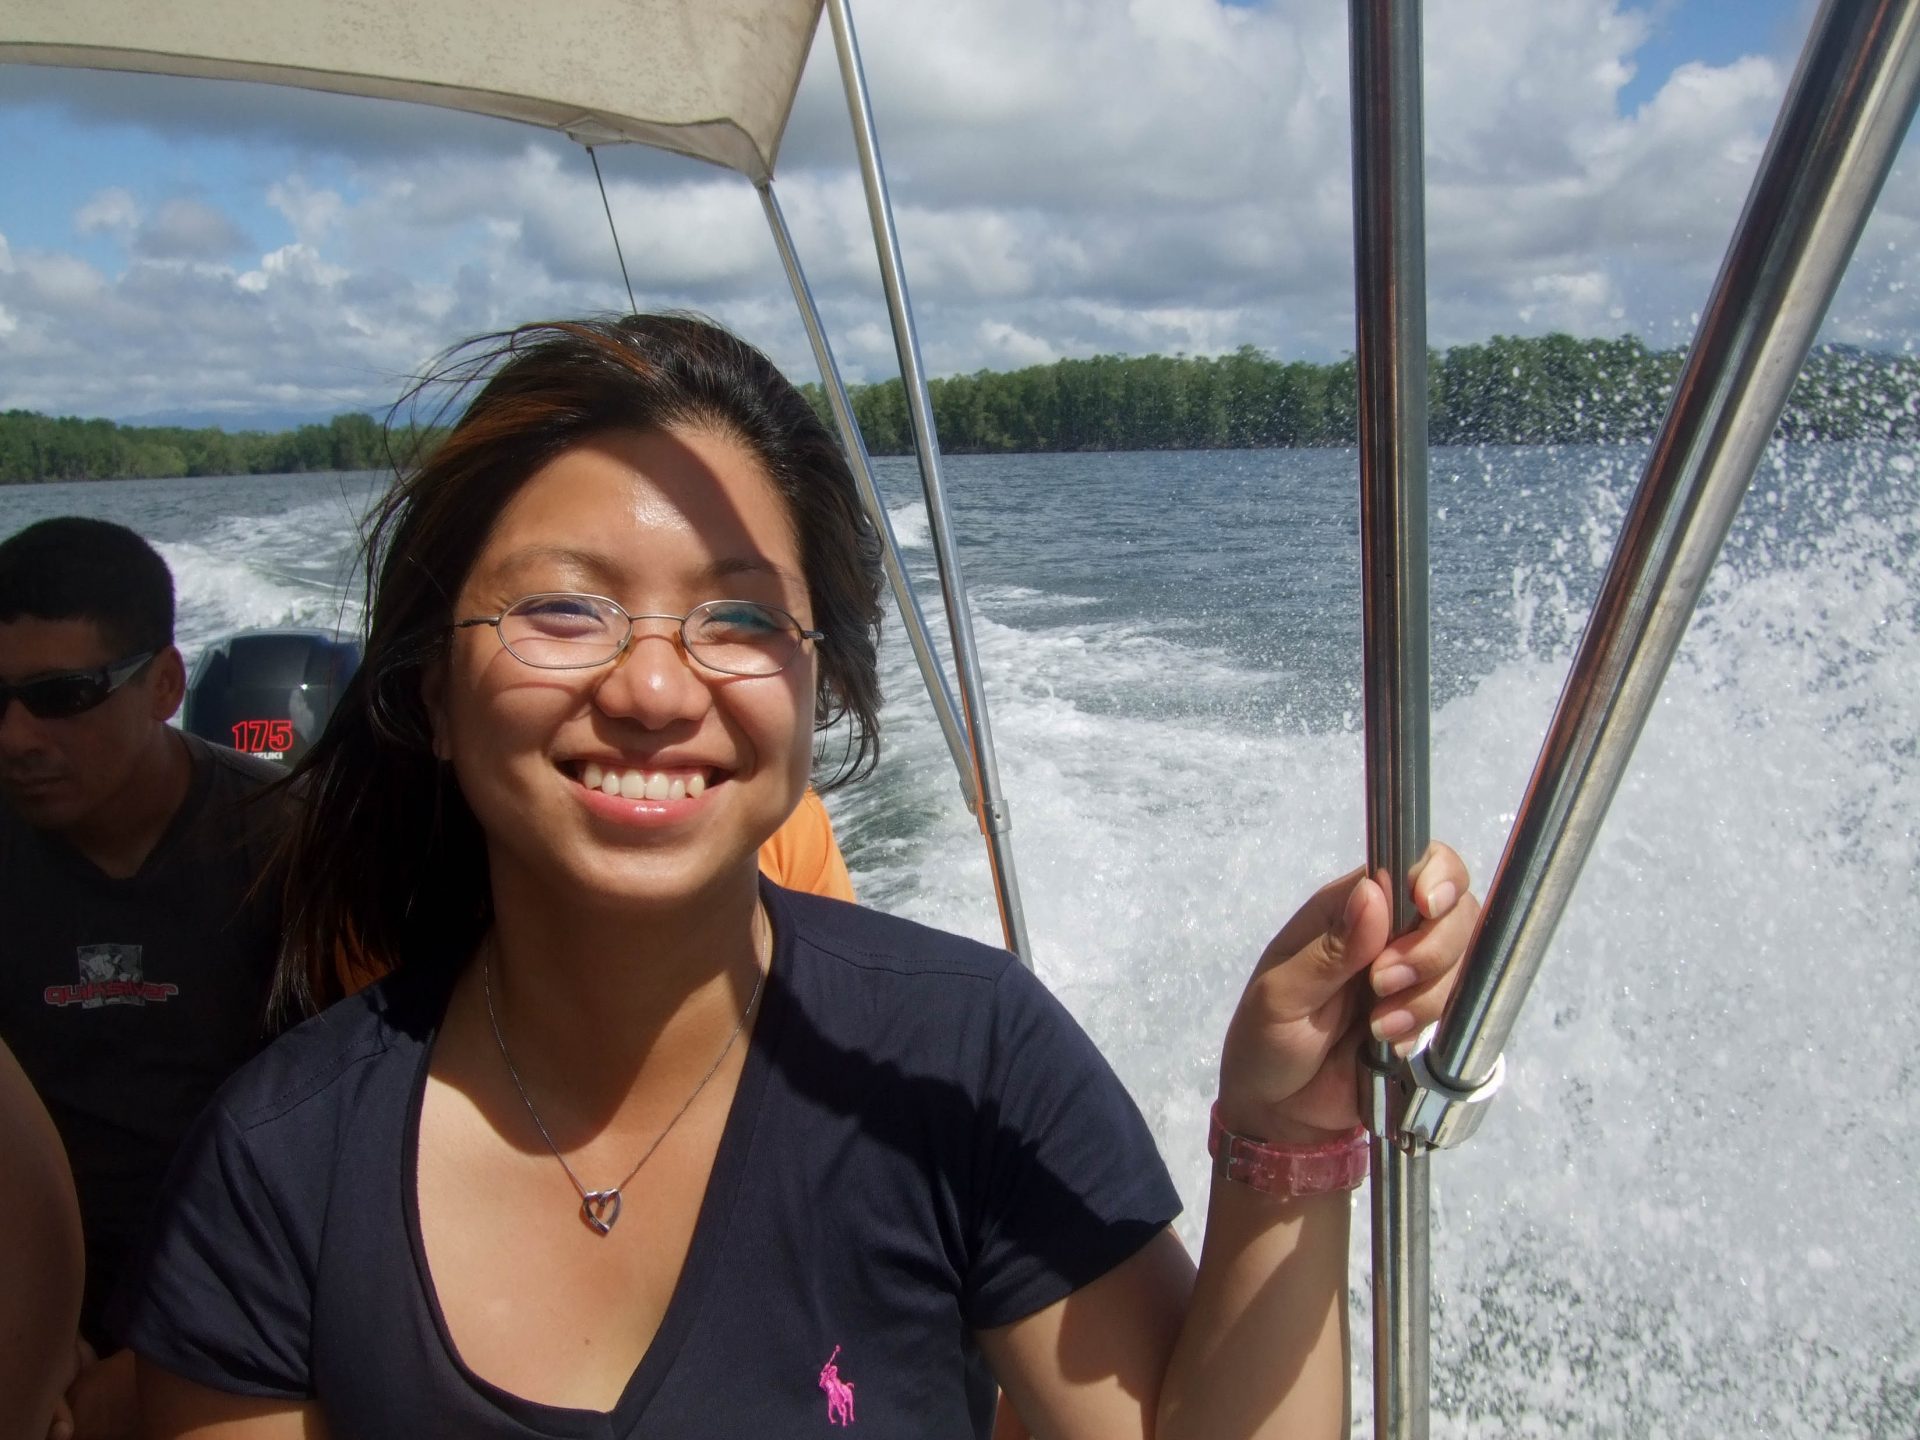 A young woman smiles while riding a motor-boat in the Caribbean